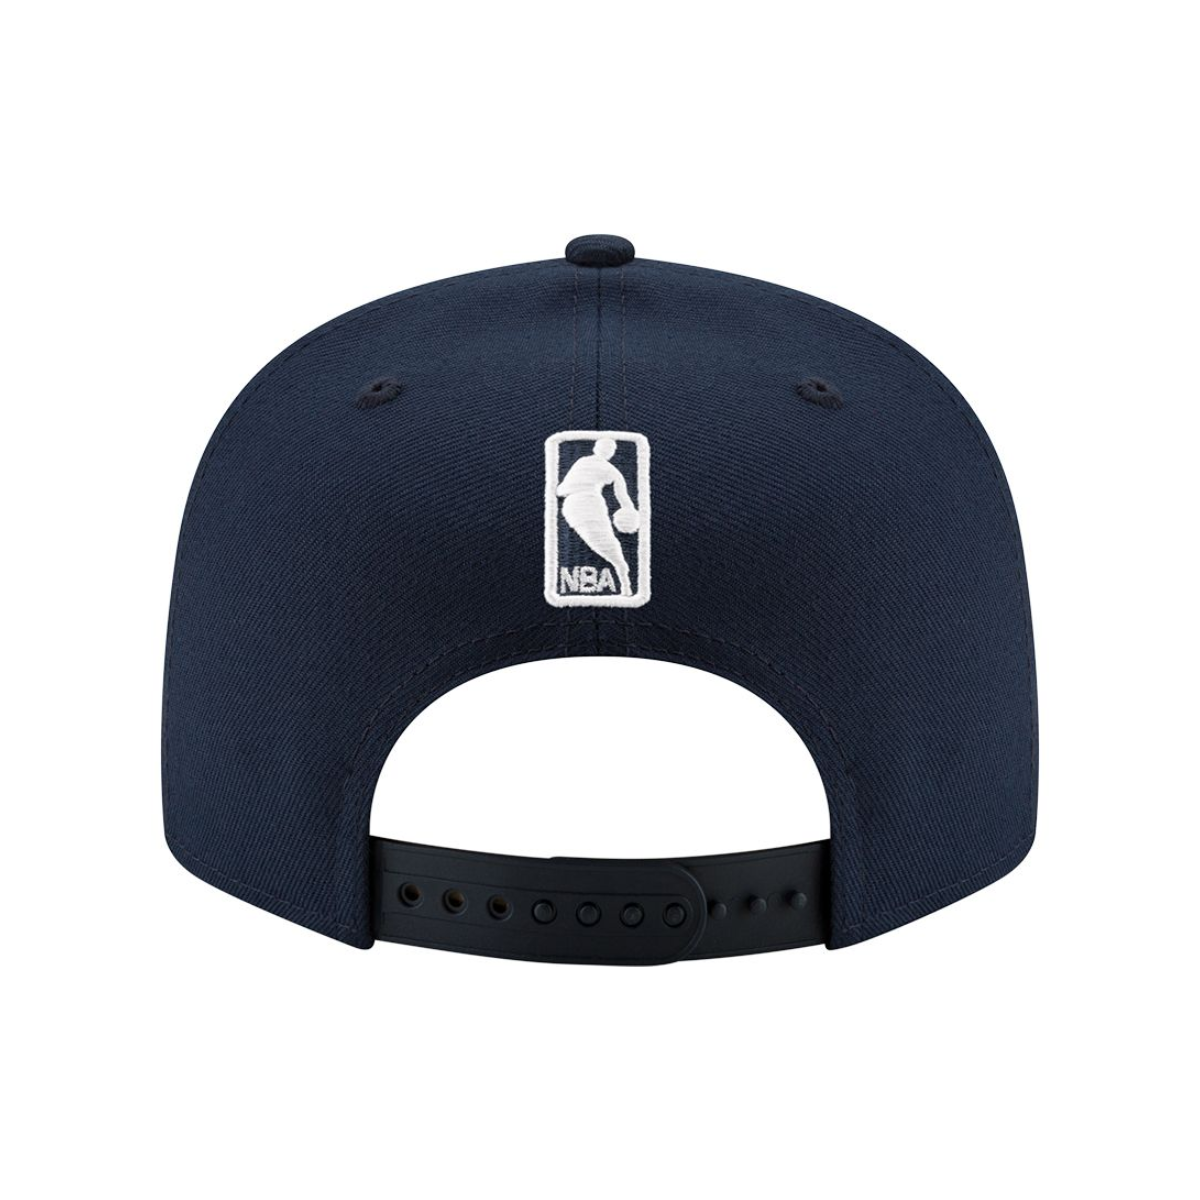 Nuggets Primary Icon 9FIFTY Snapback Navy/Cardinal